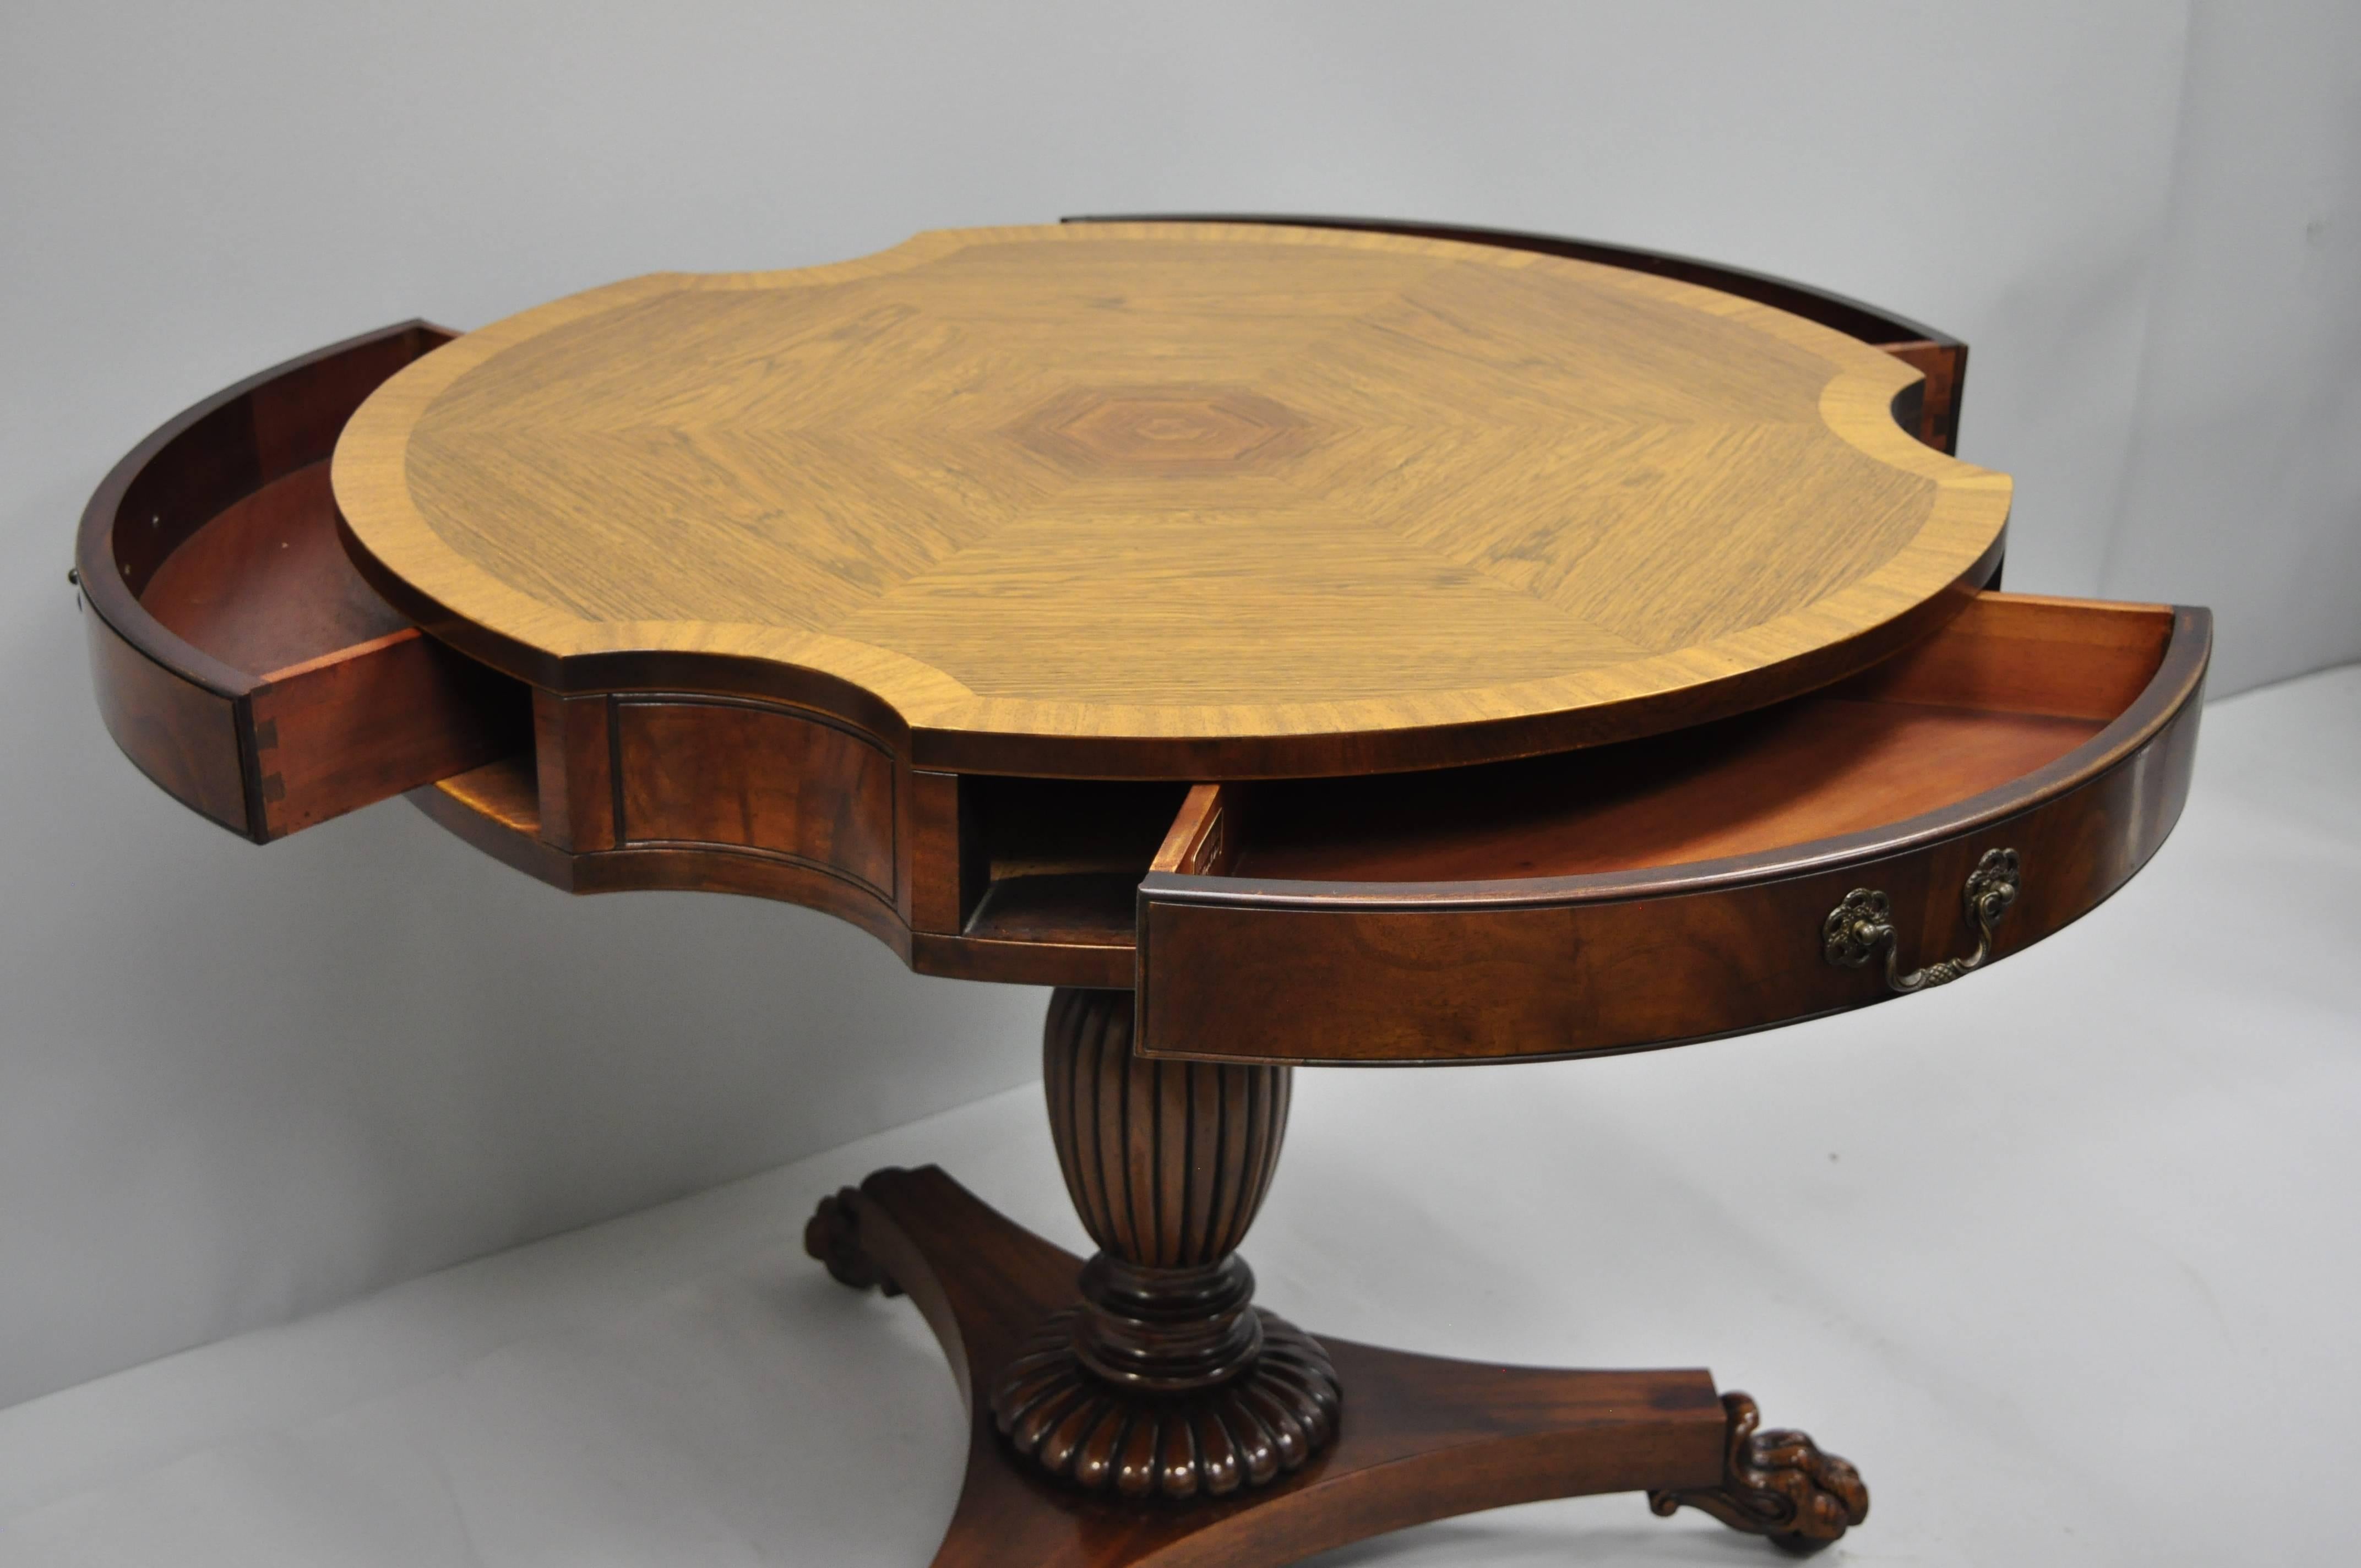 Grosfeld House mahogany and rosewood empire style three-drawer pedestal drum table with claw feet. Item features shaped banded rosewood top, paw foot tripod pedestal base, beautiful wood grain, original label, 3 dovetailed drawers, quality American